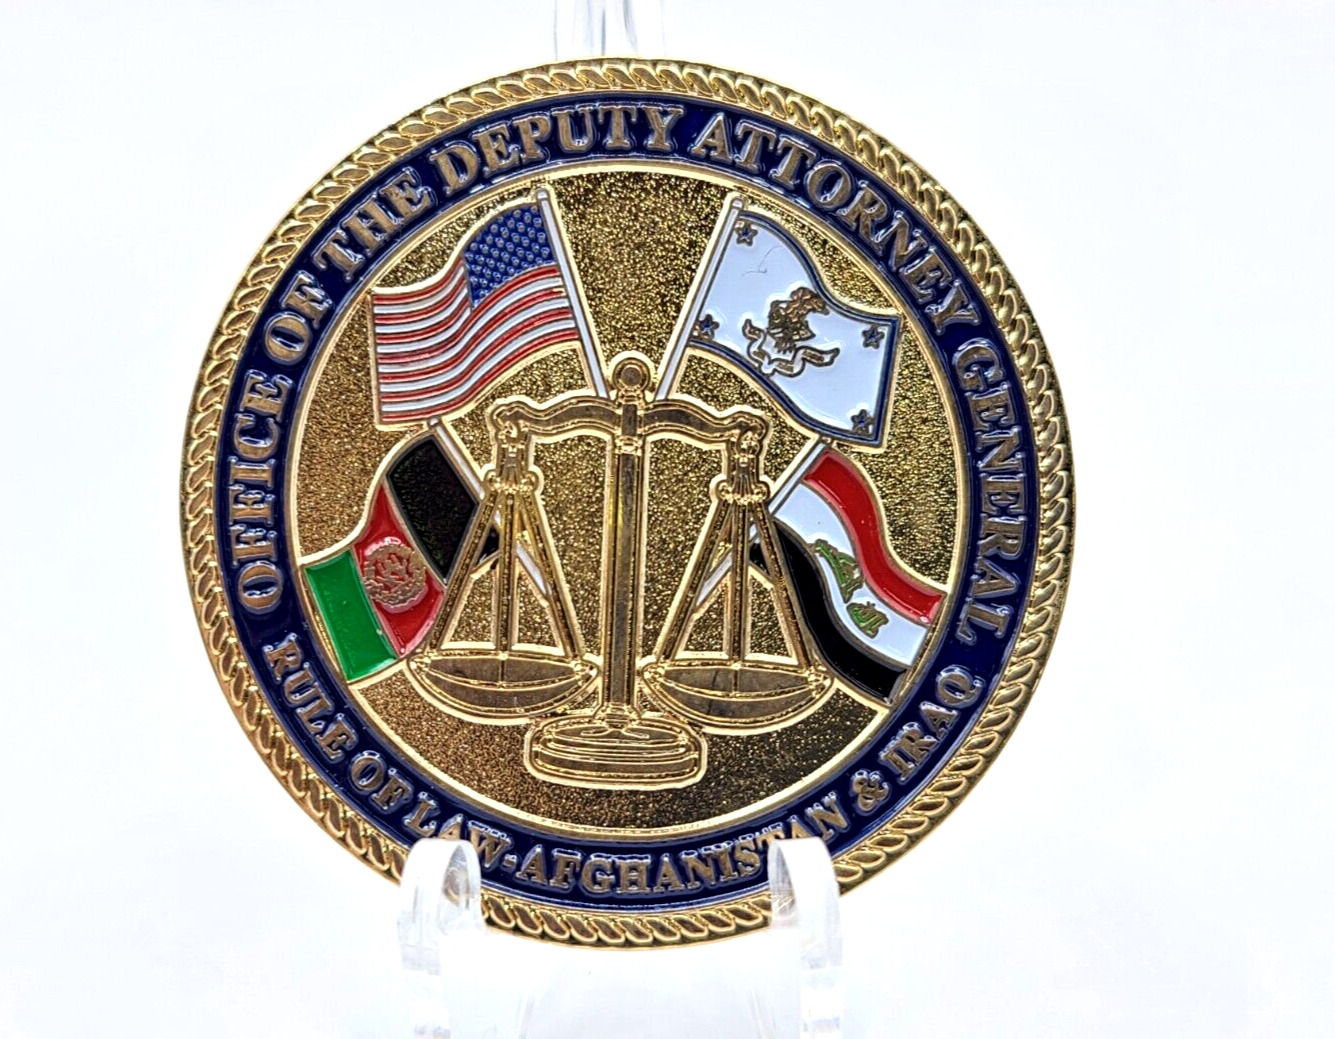 Department Of Justice Office Of The Deputy Attourney General Challenge Coin